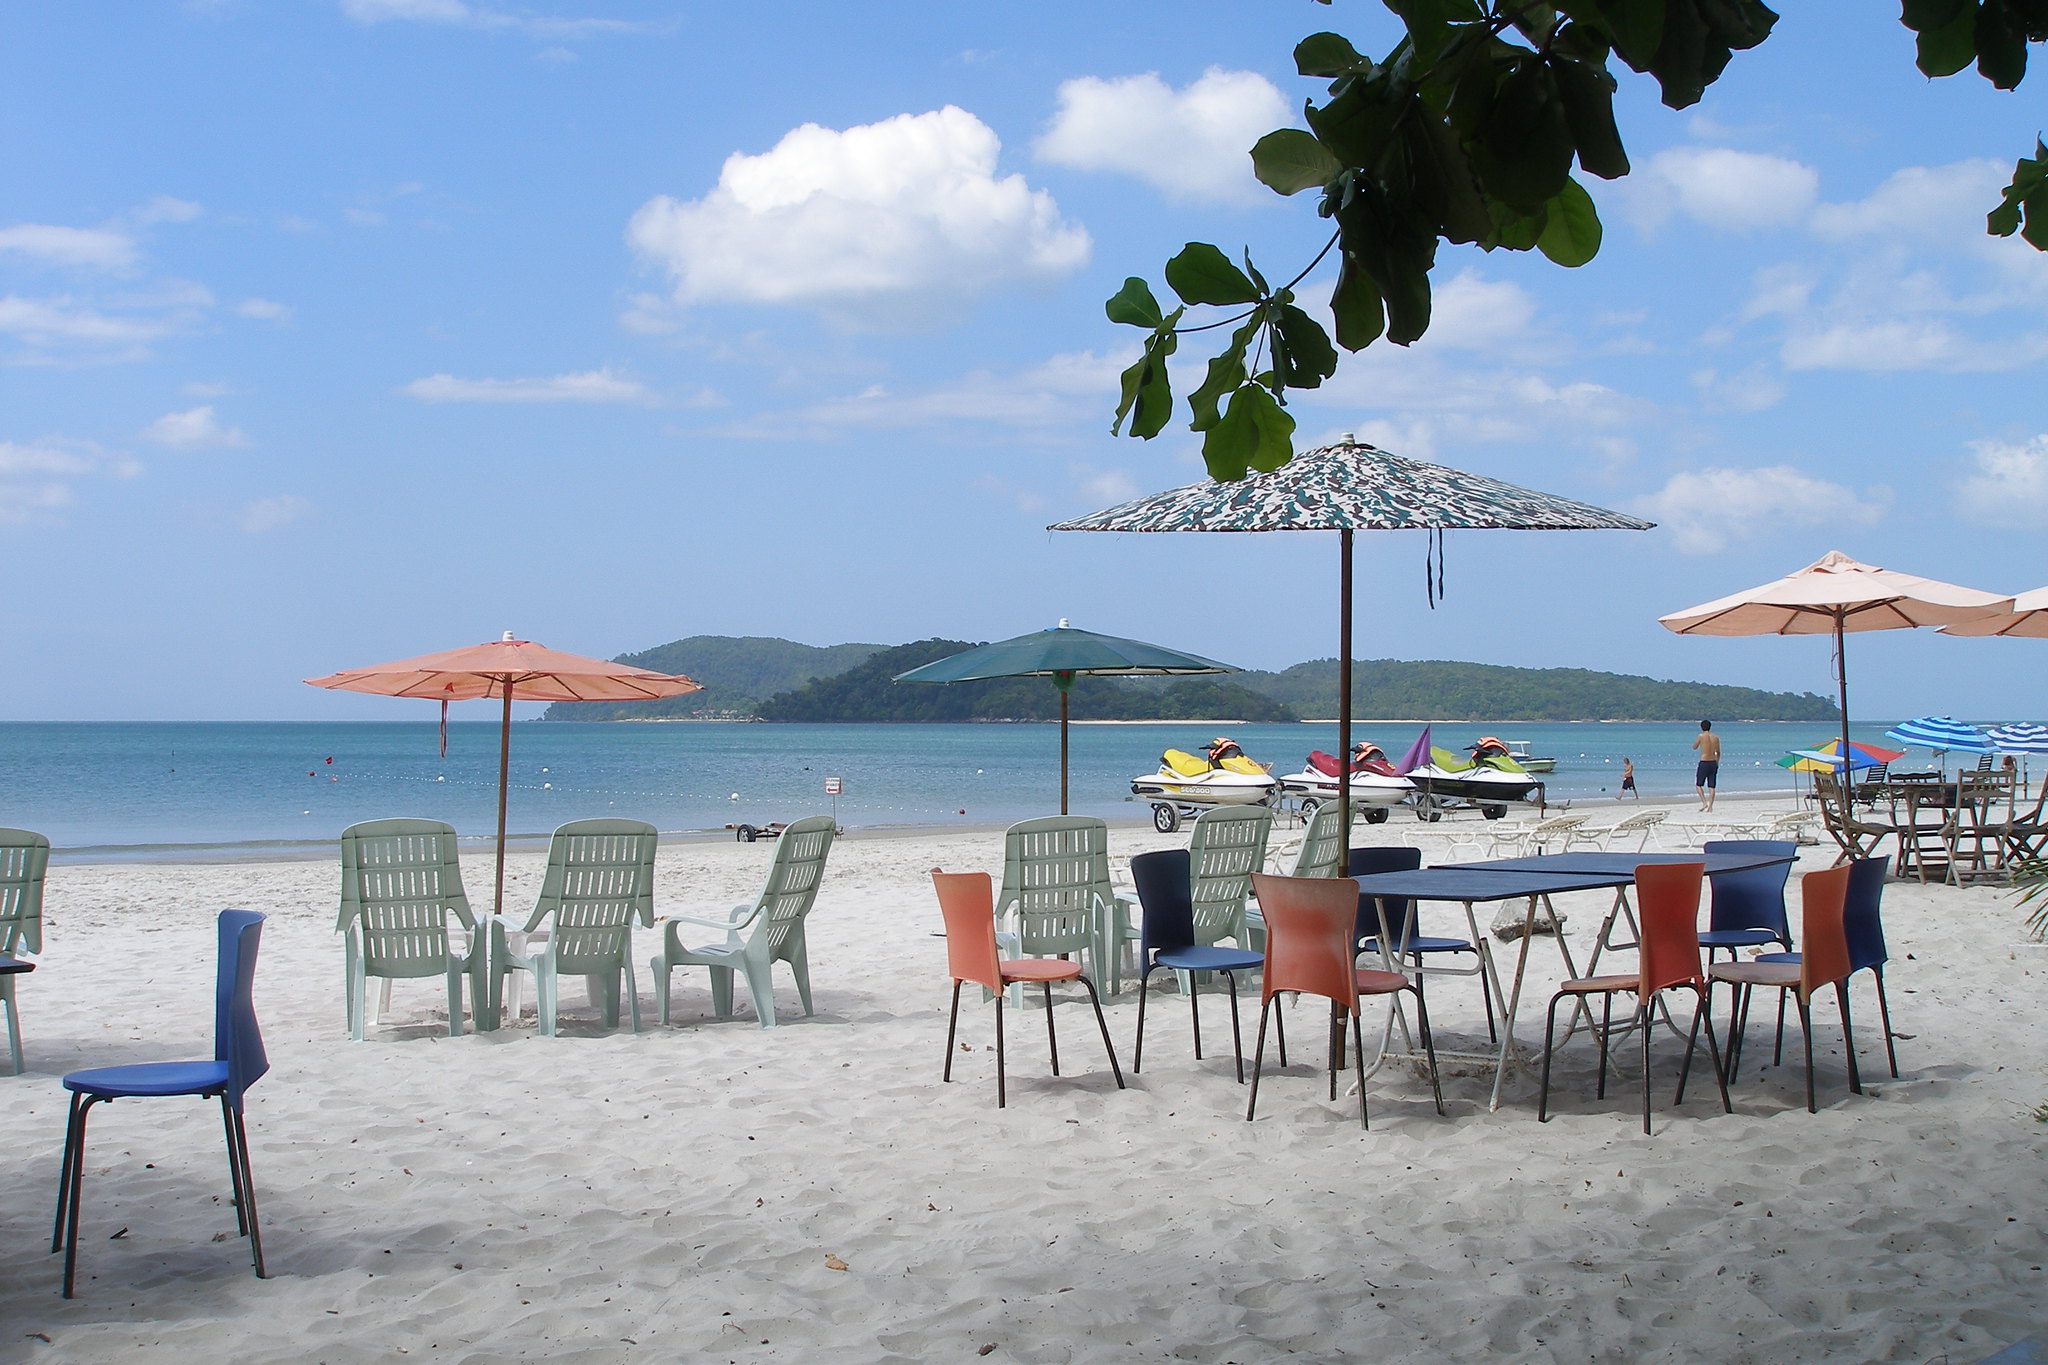 singapore malaysia and langkawi tour package